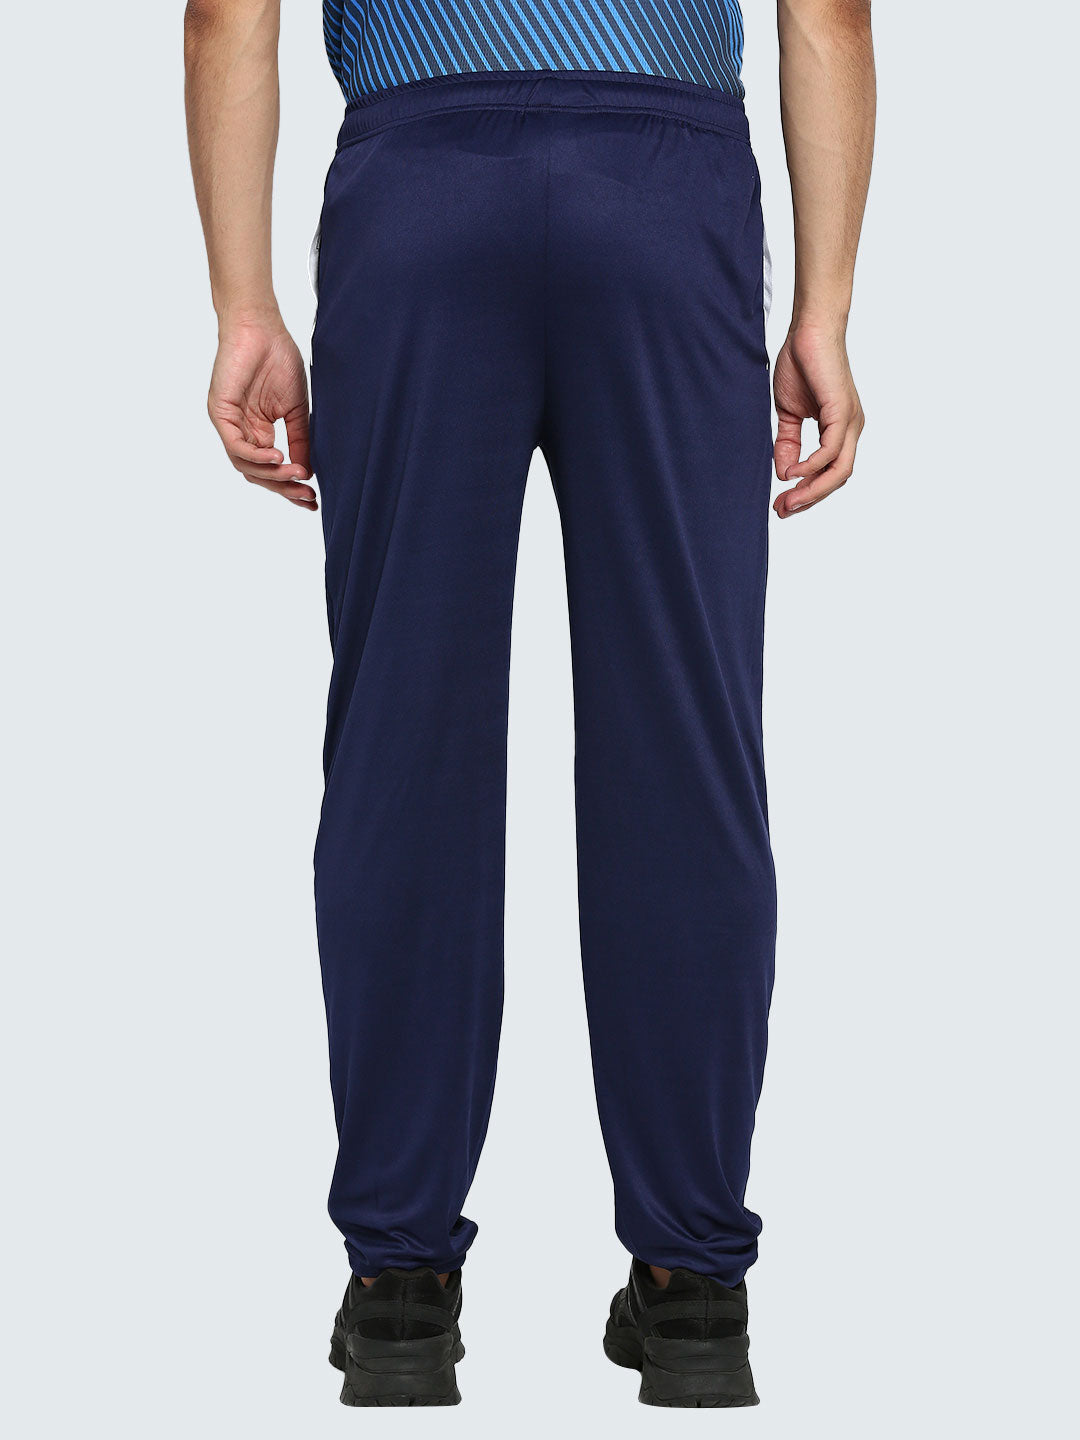 Buy Navy Blue Track Pants for Men by The Indian Garage Co Online | Ajio.com